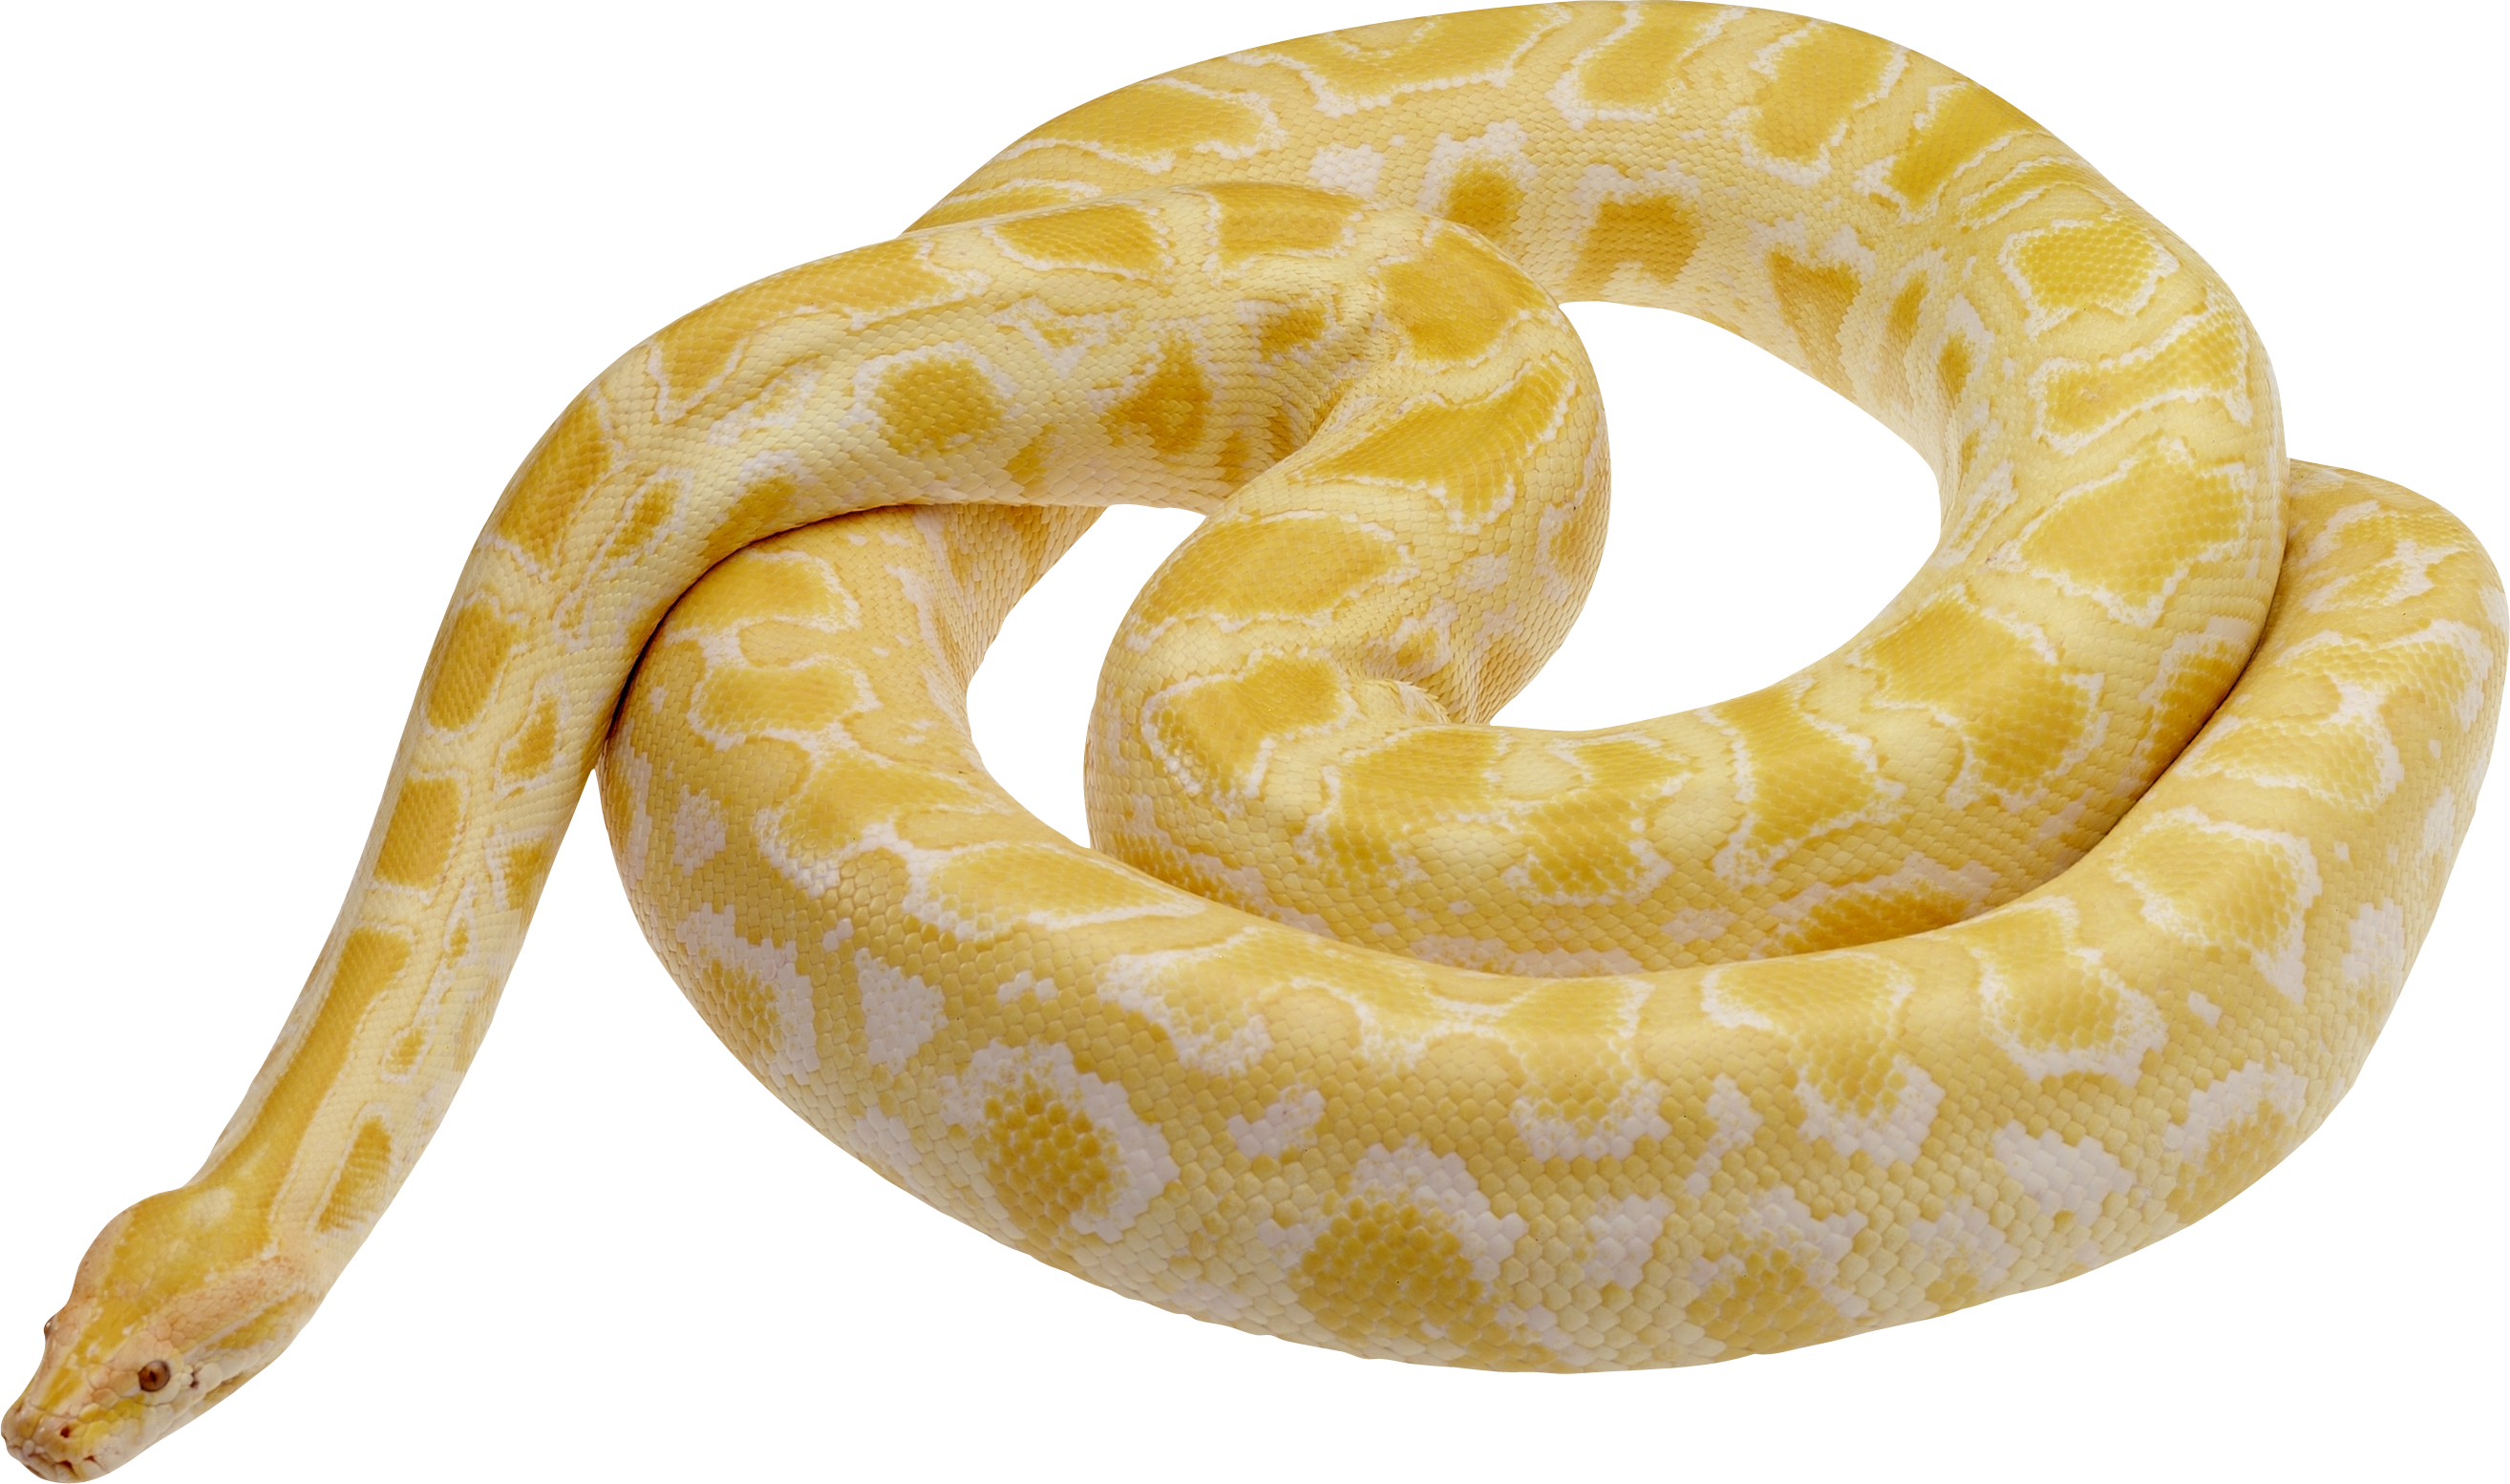 Snake PNG image picture downl